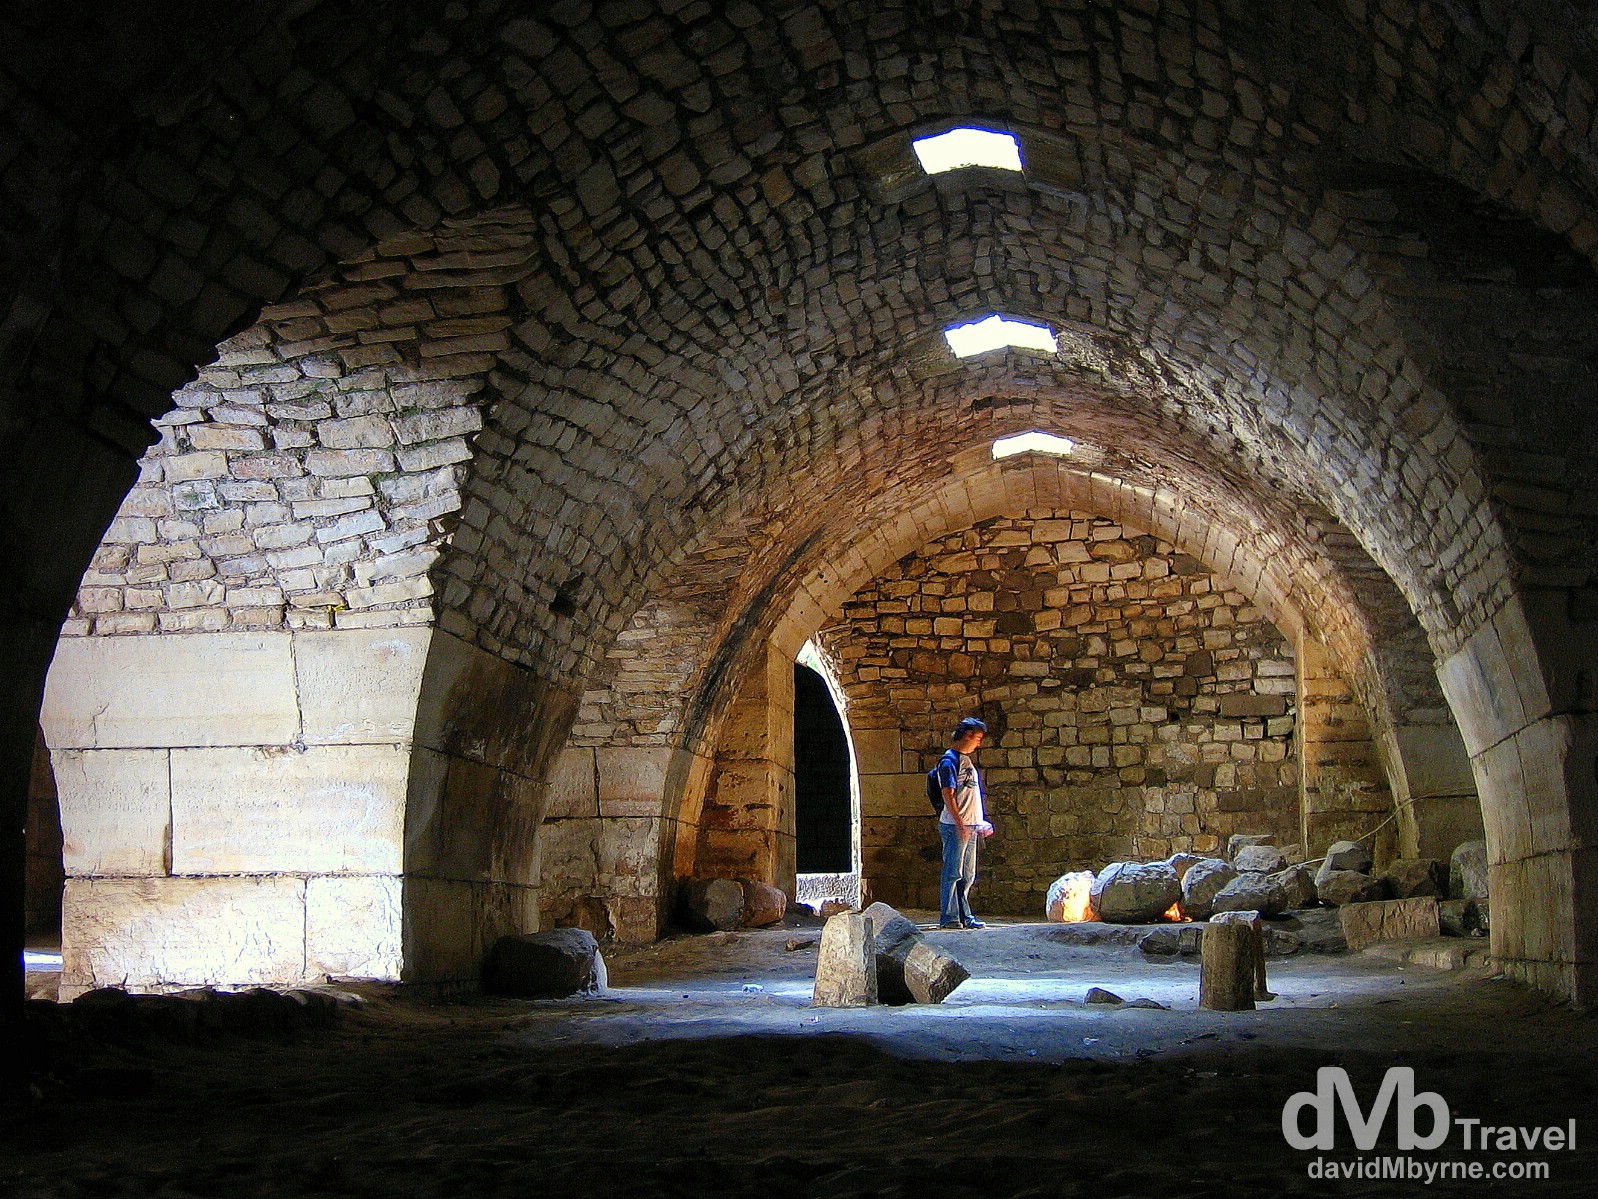 Inside one of the cavernous corridors of the old Crusader castle Crac des Chevaliers in Syria. May 7, 2008.